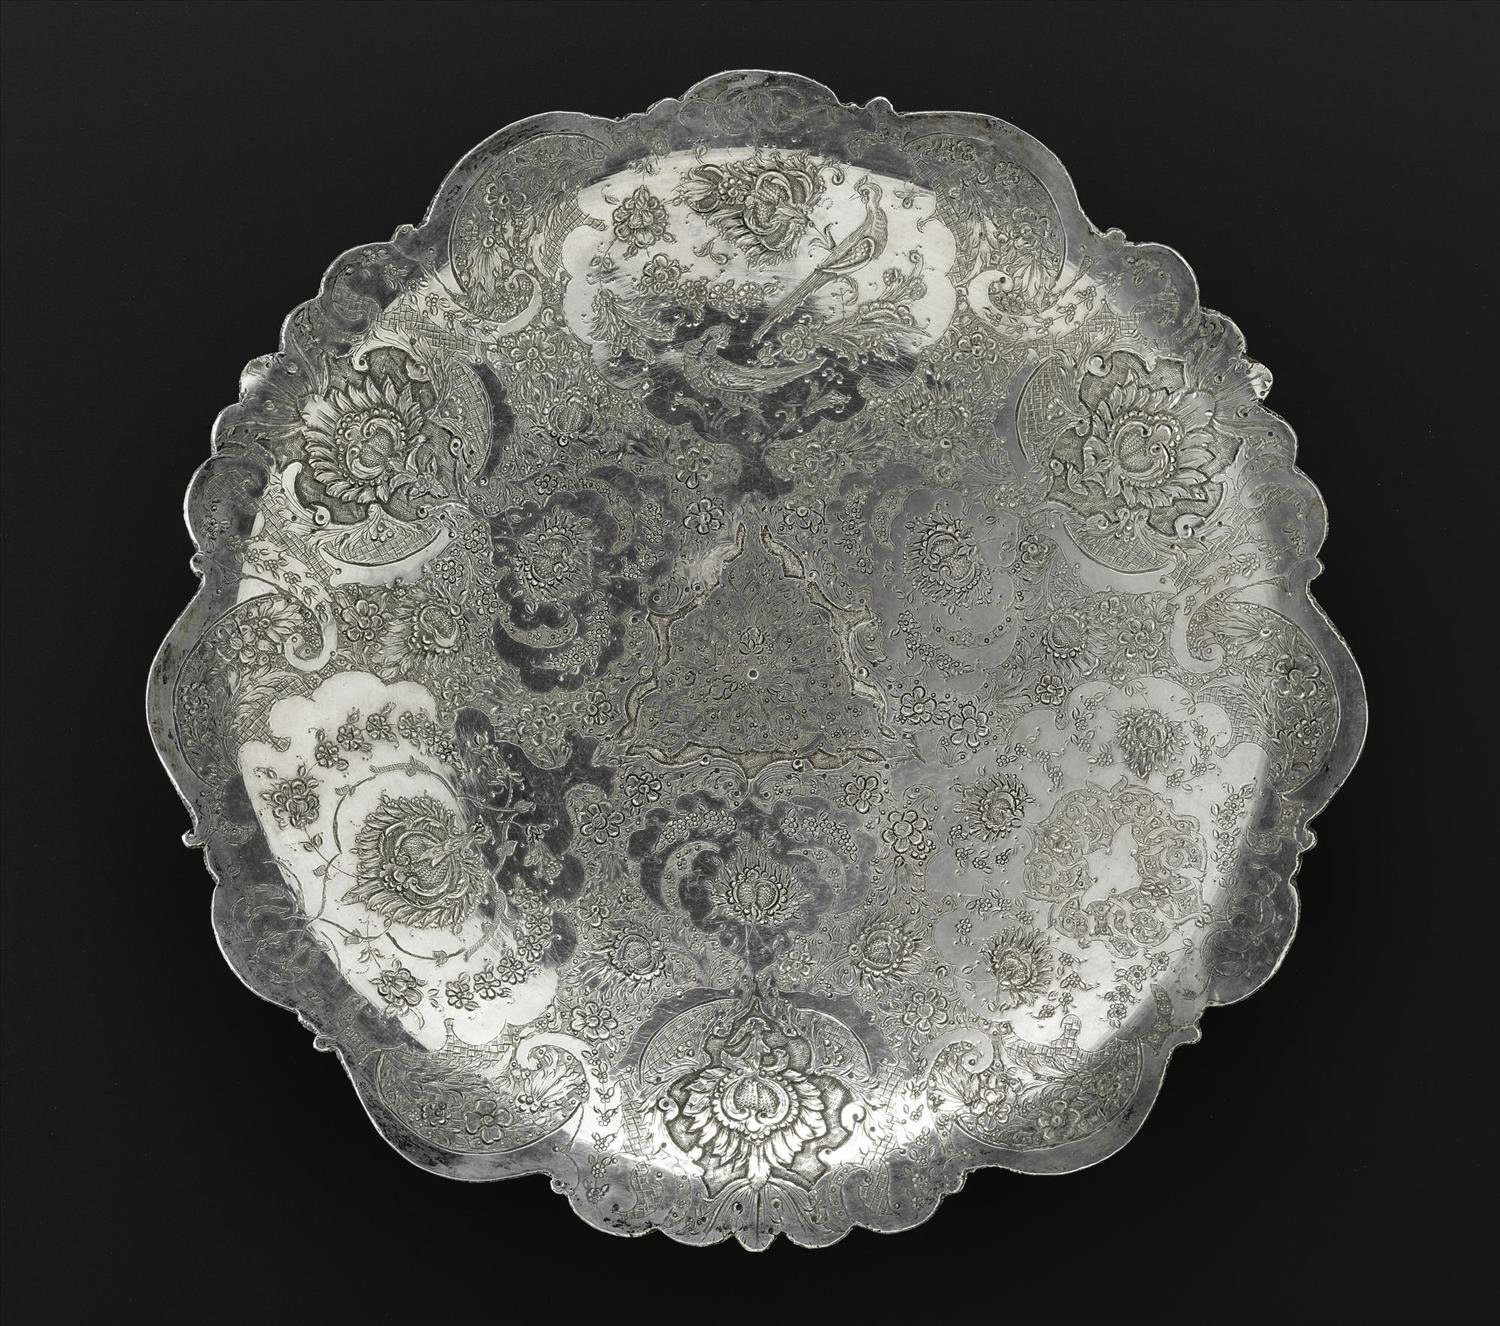 Circular dish of silver, shallow, engraved with floral decoration and two birds, one above the other, in the top centre medallion, hallmarked on the reverse, Iran, probably Isfahan, 1920s-1940s, acc. no V.2015.60